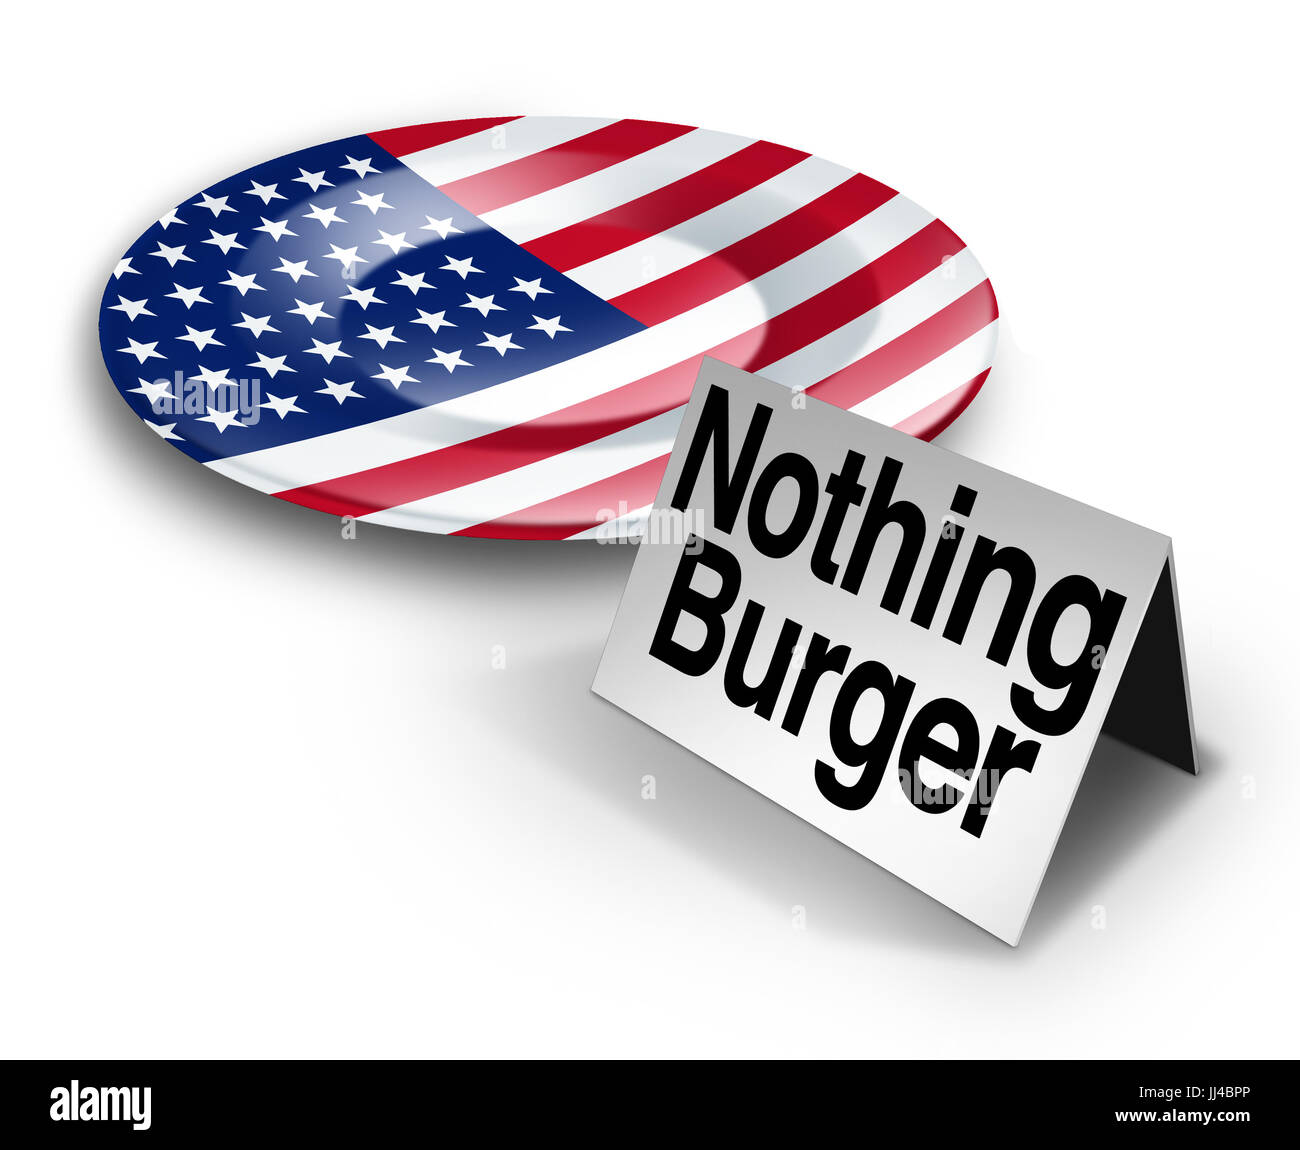 Political nothing burger or nothingburger phrase concept as an empty plate with an American flag representing fake news investigation. Stock Photo